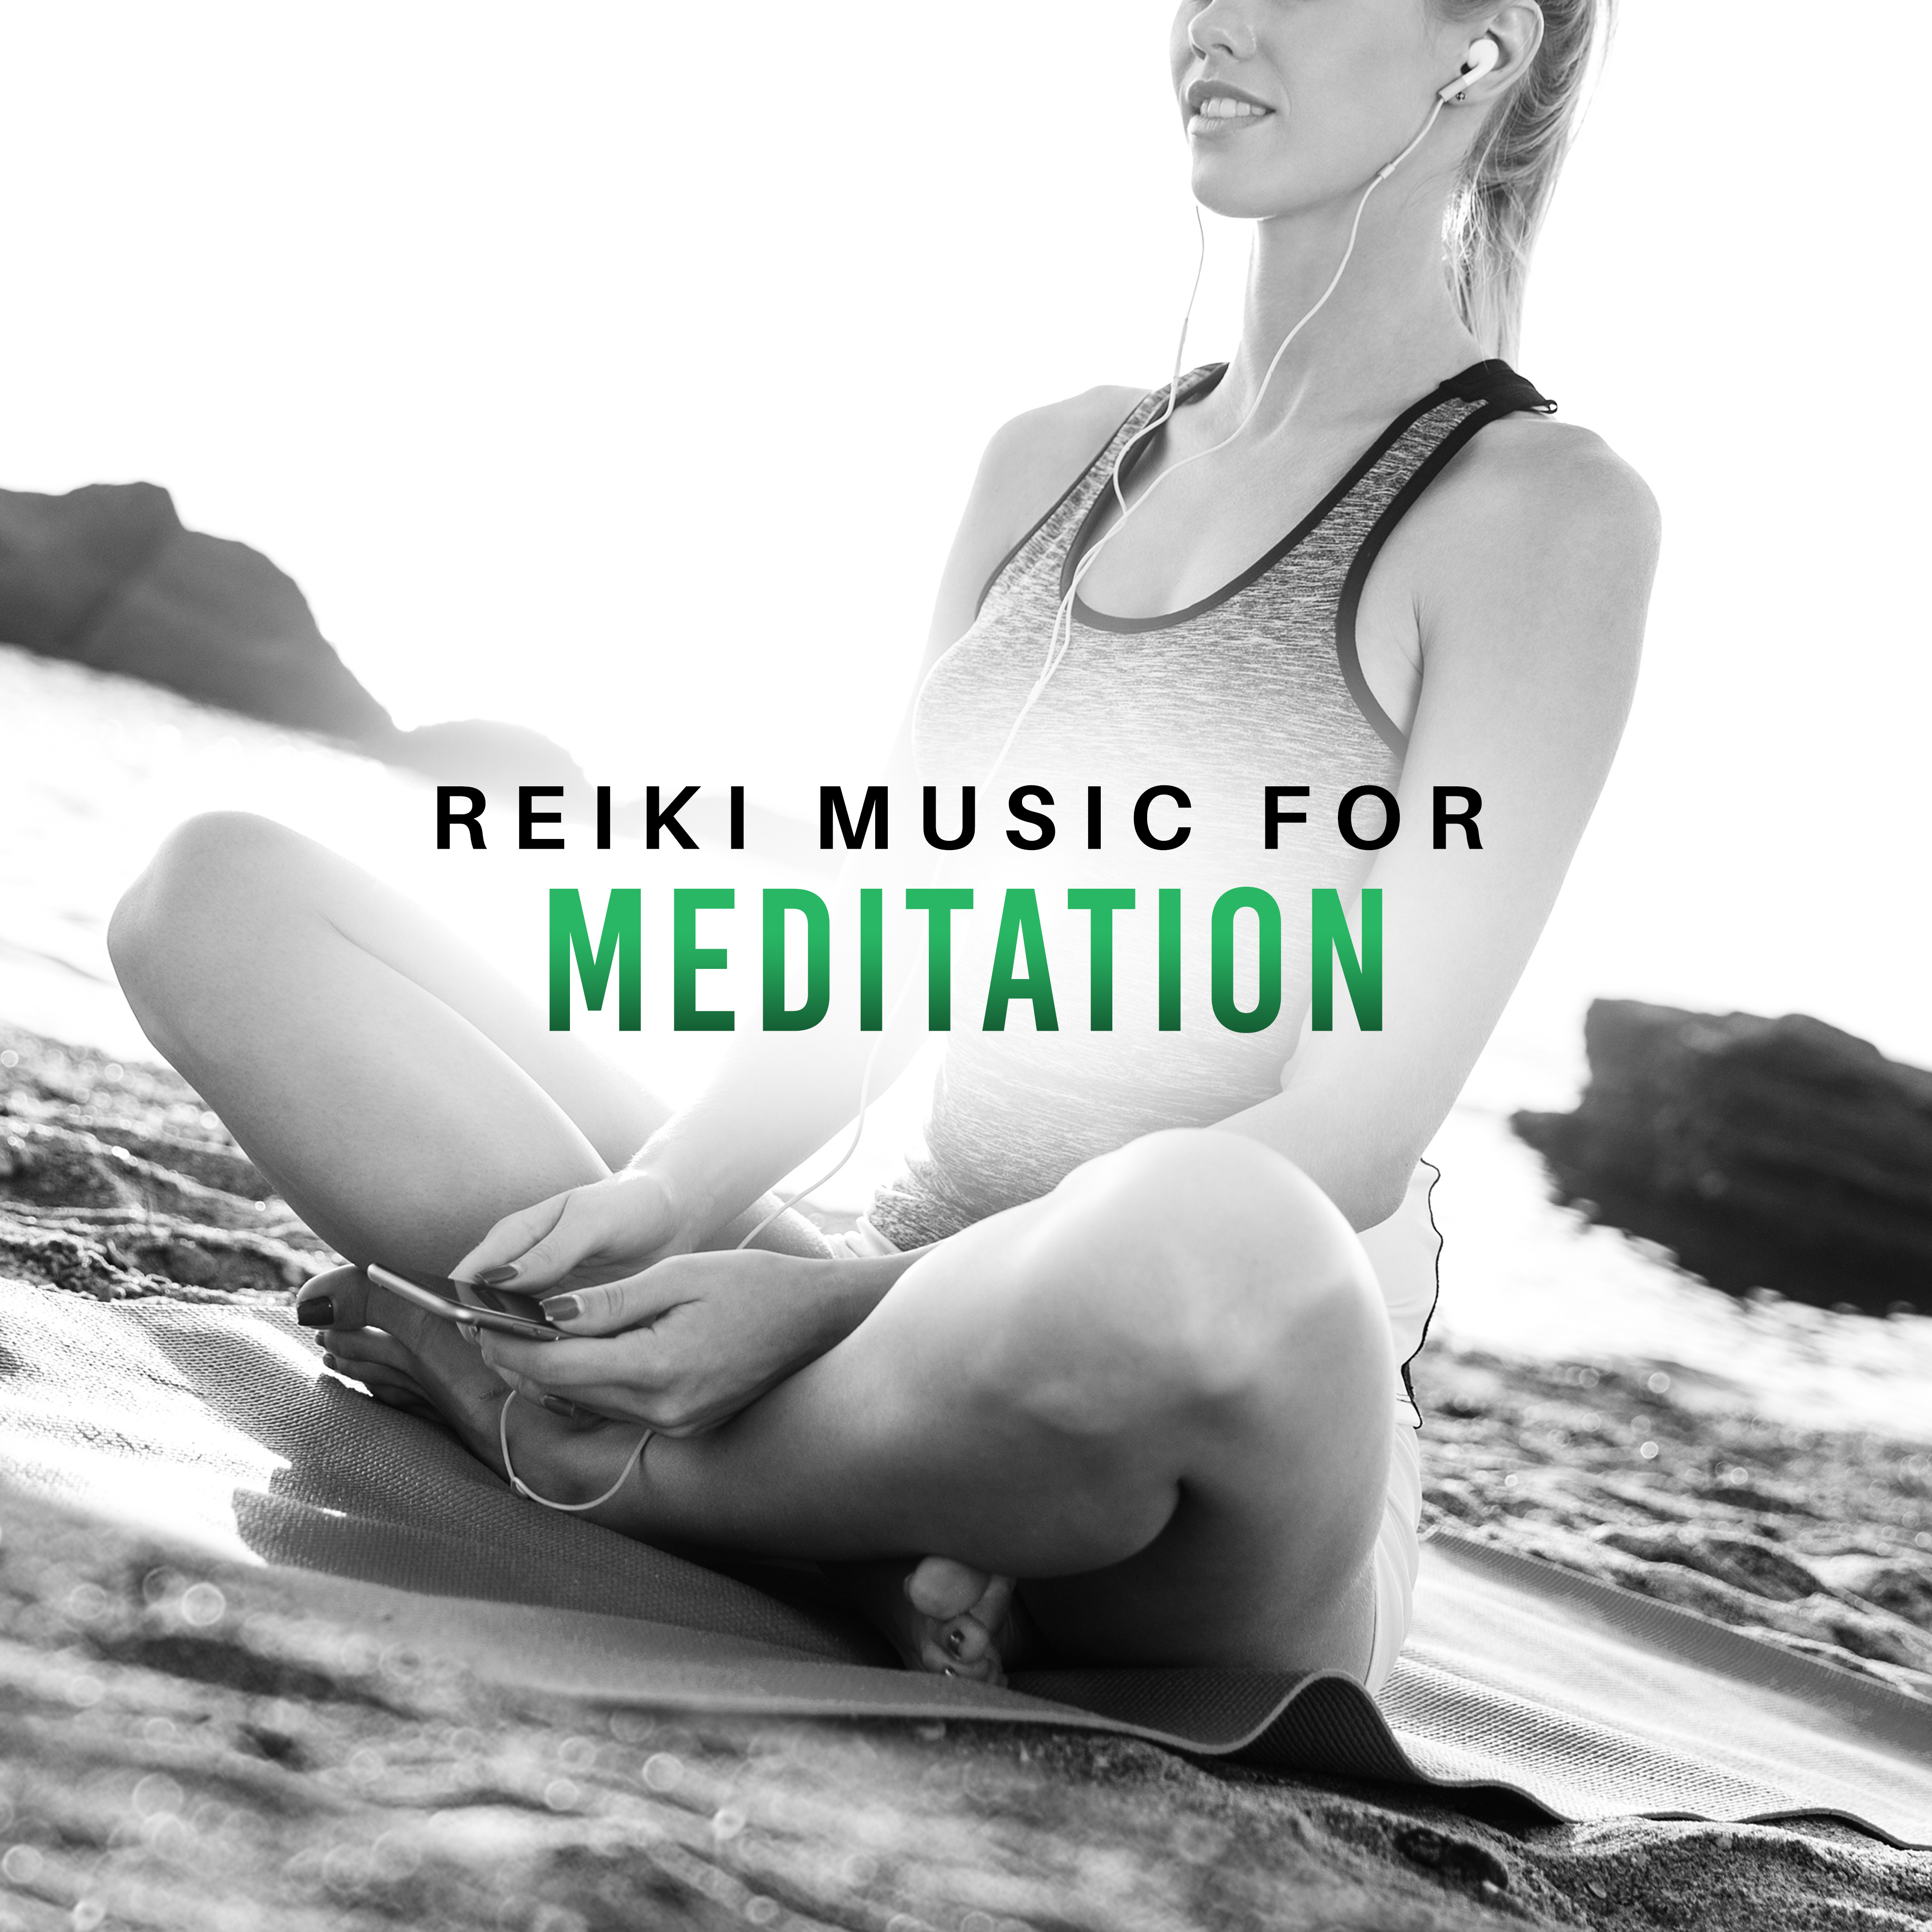 Reiki Music for Meditation  Hatha Yoga, Deep Concentration, Peaceful Mind, Pure Relaxation, Meditate